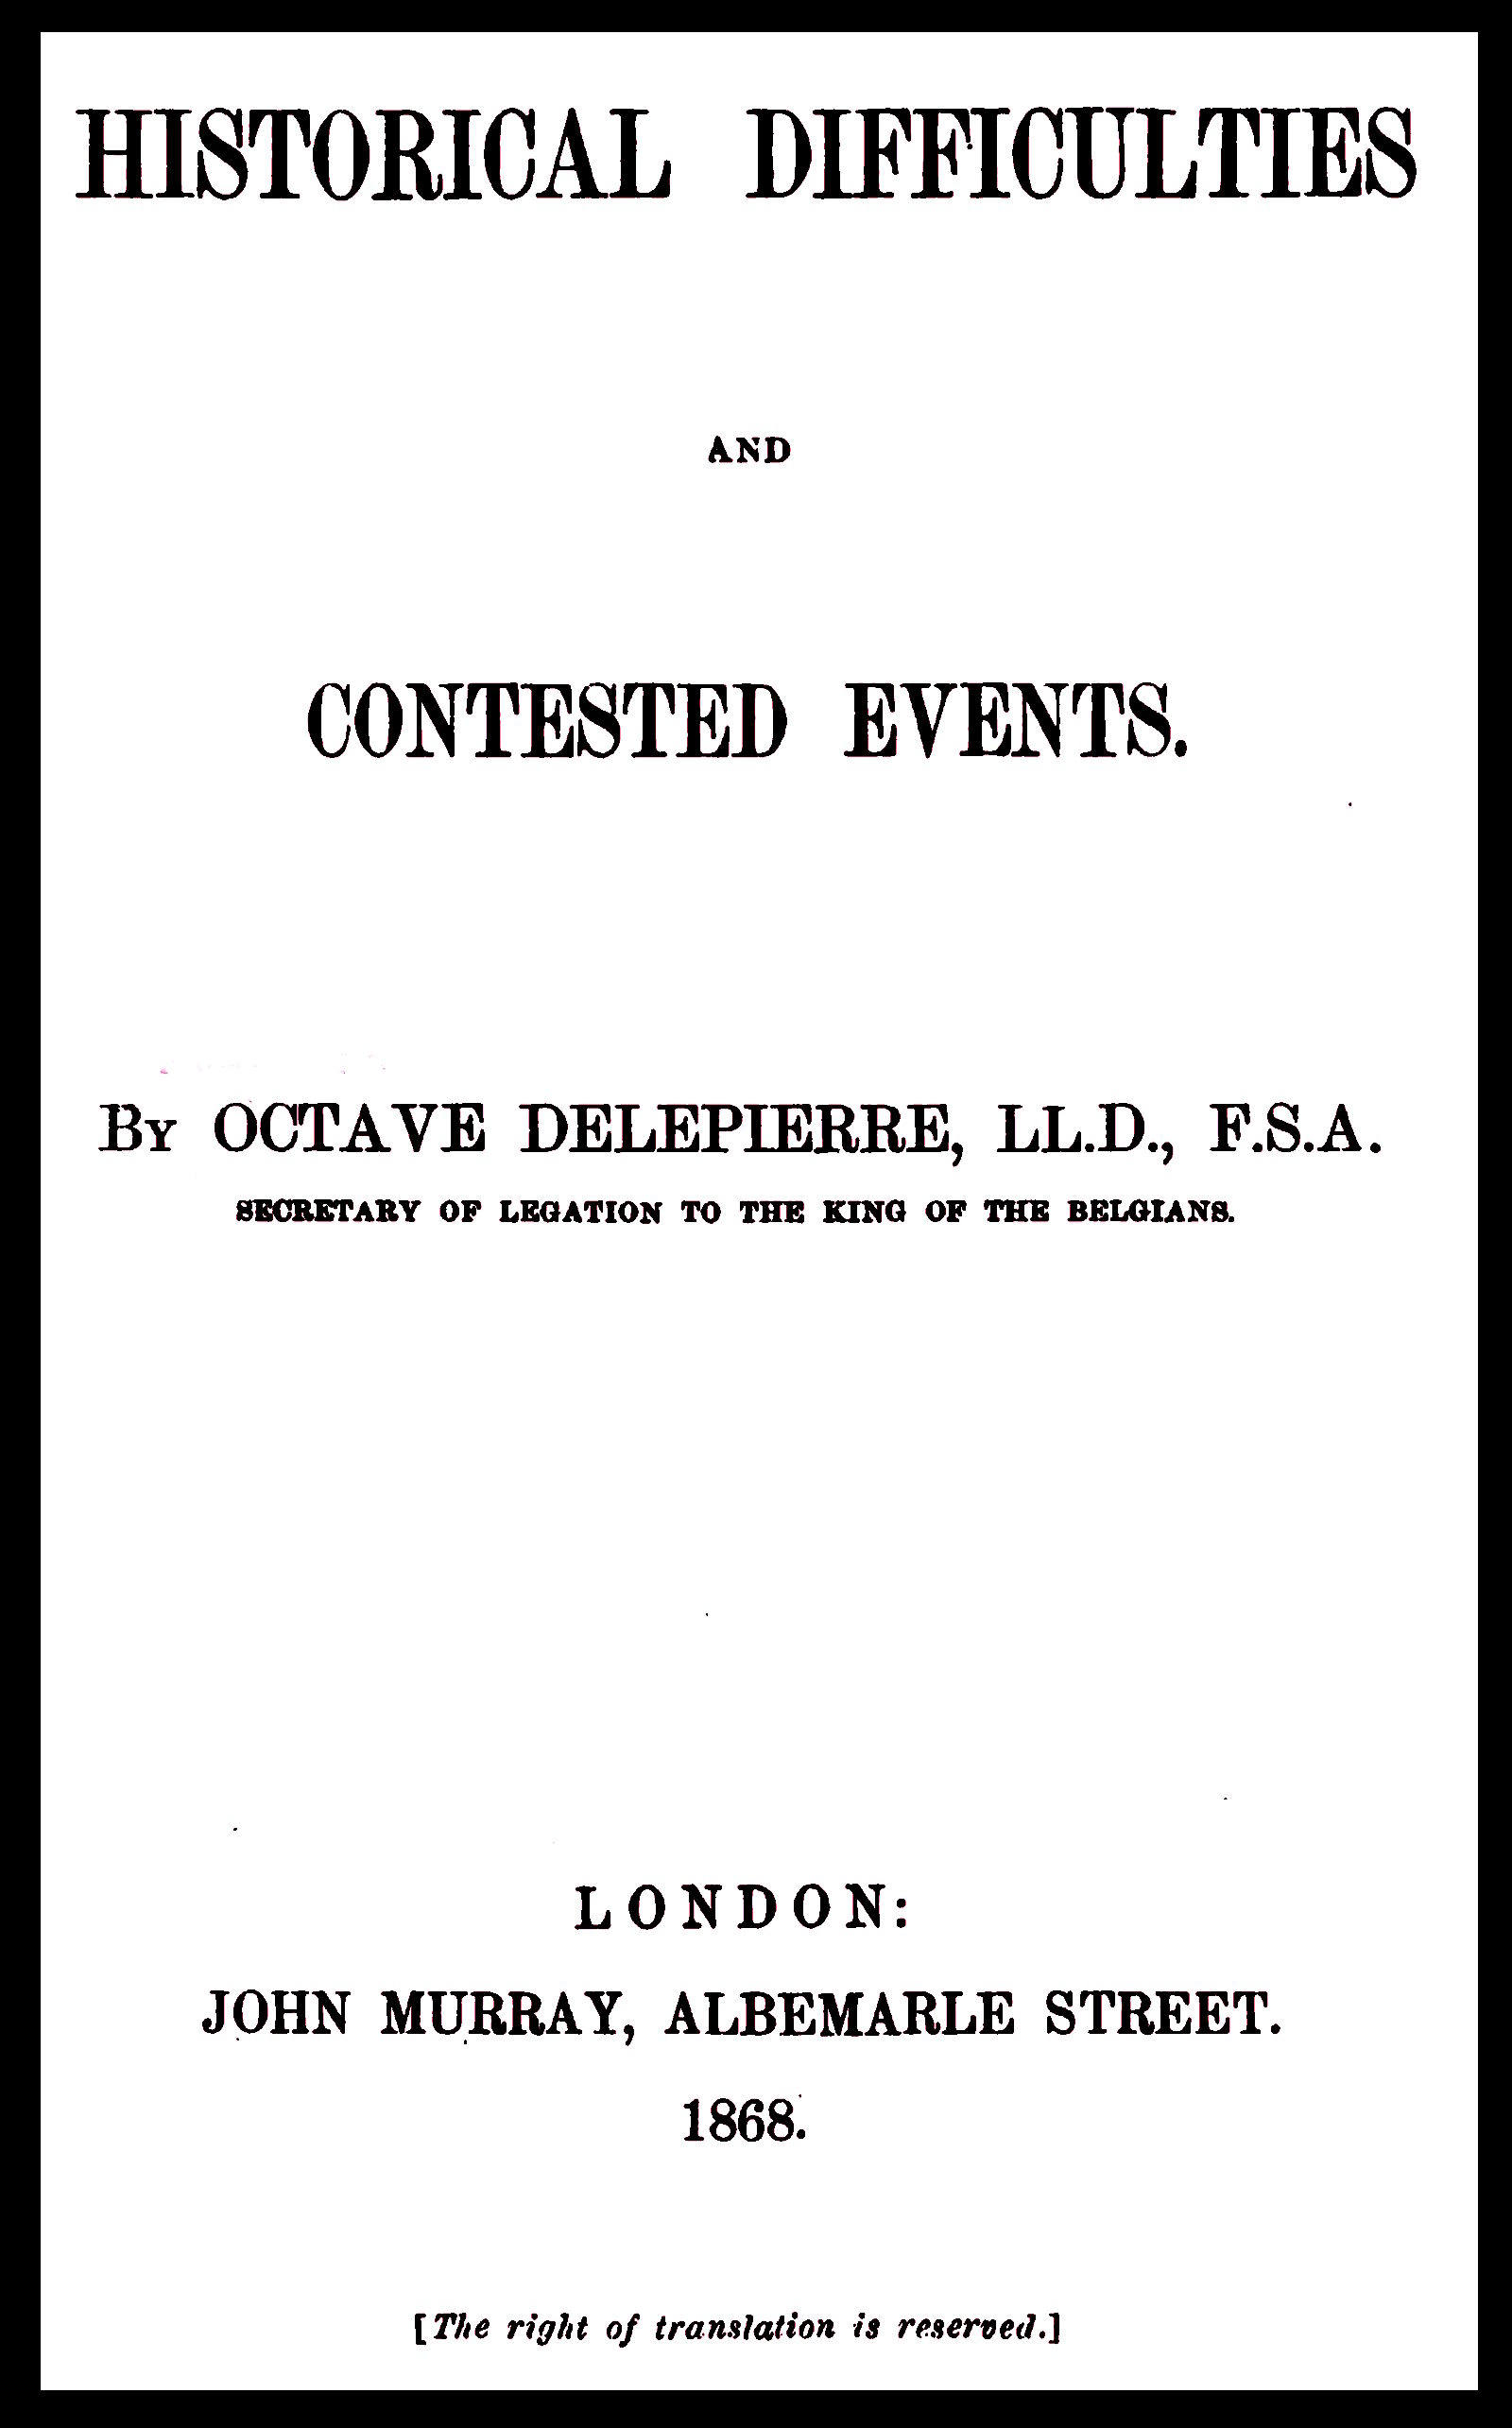 Historical Difficulties and Contested Events Project Gutenberg